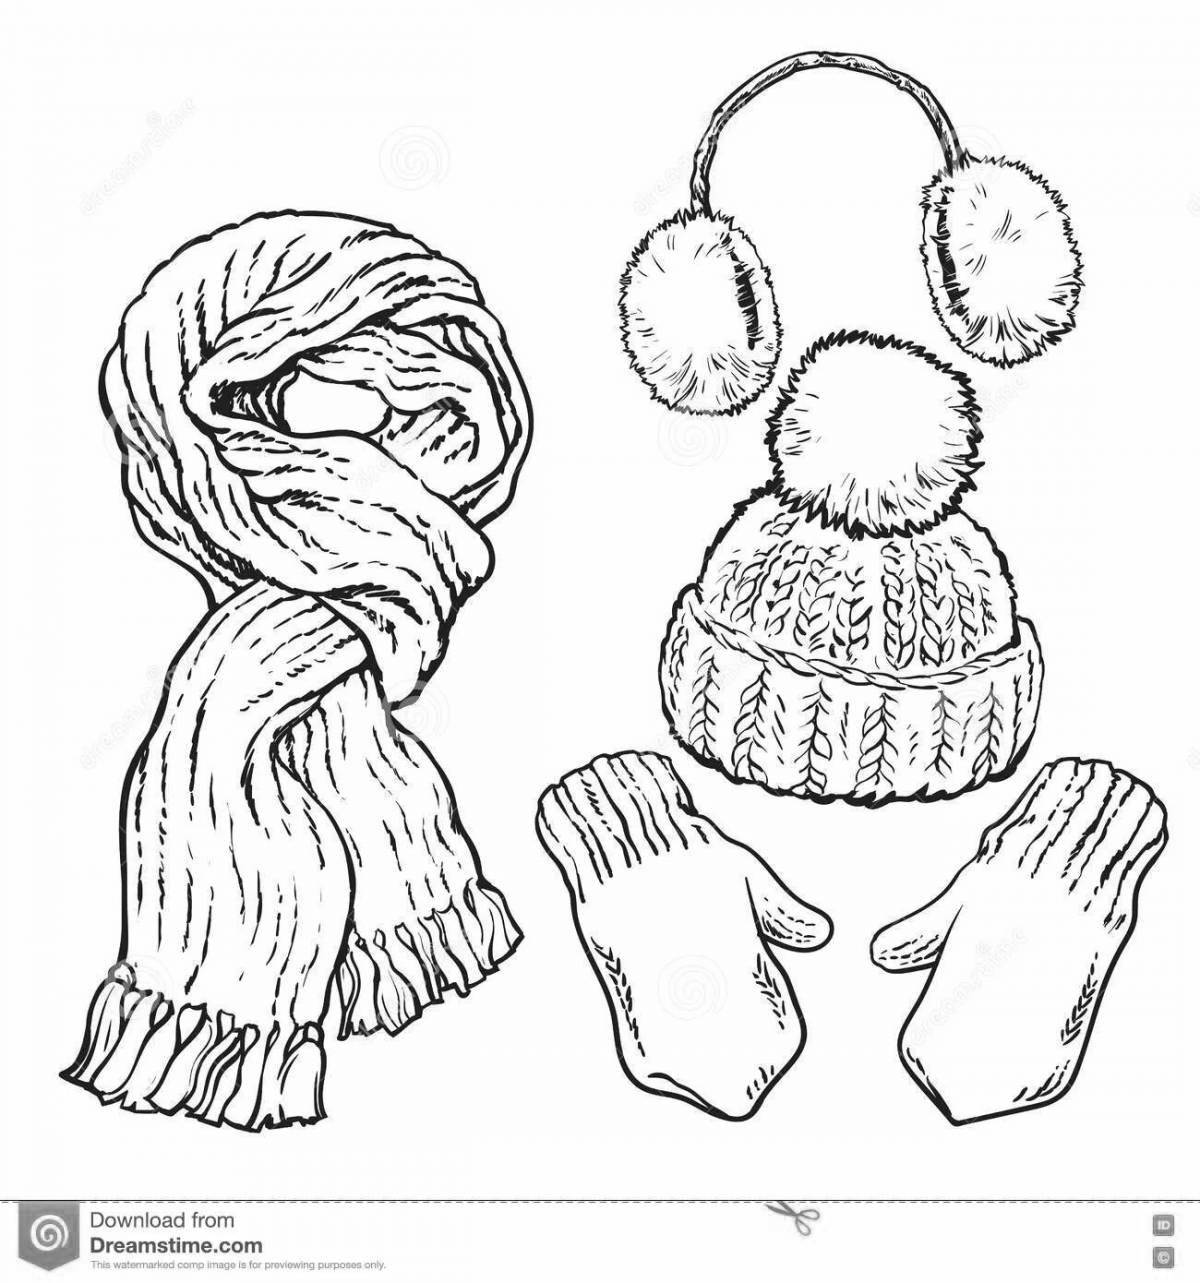 Fancy hat and scarf coloring page